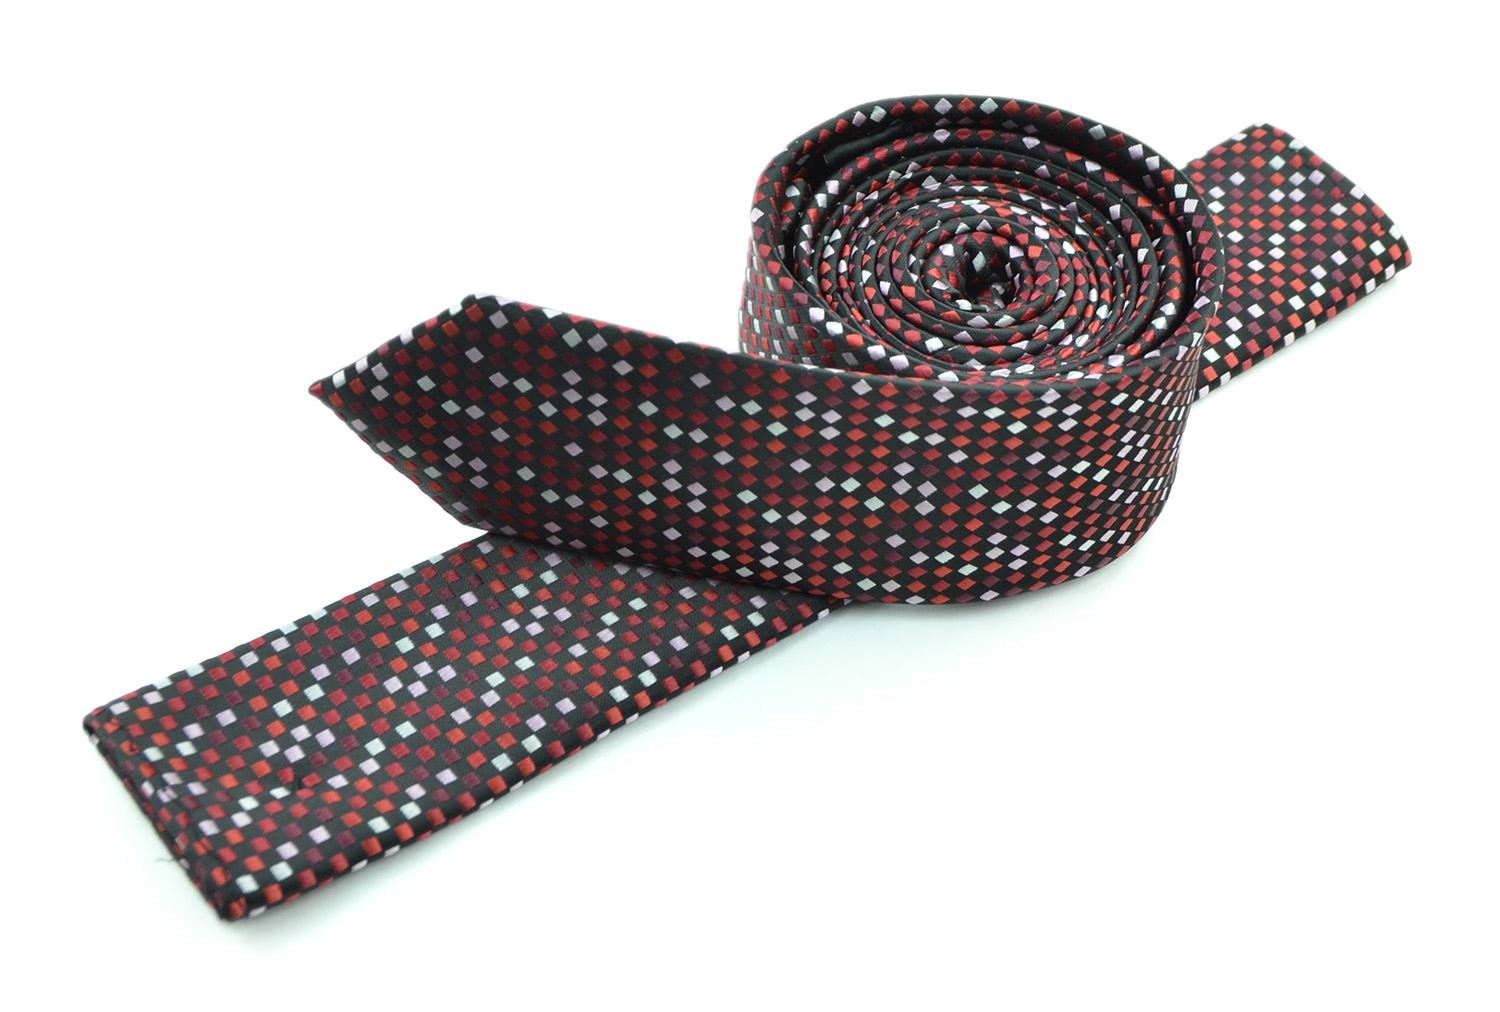 Moda Di Raza Mens Led Pattern Dotted Skinny Ties Modern Imported Fashion Neckties-Red